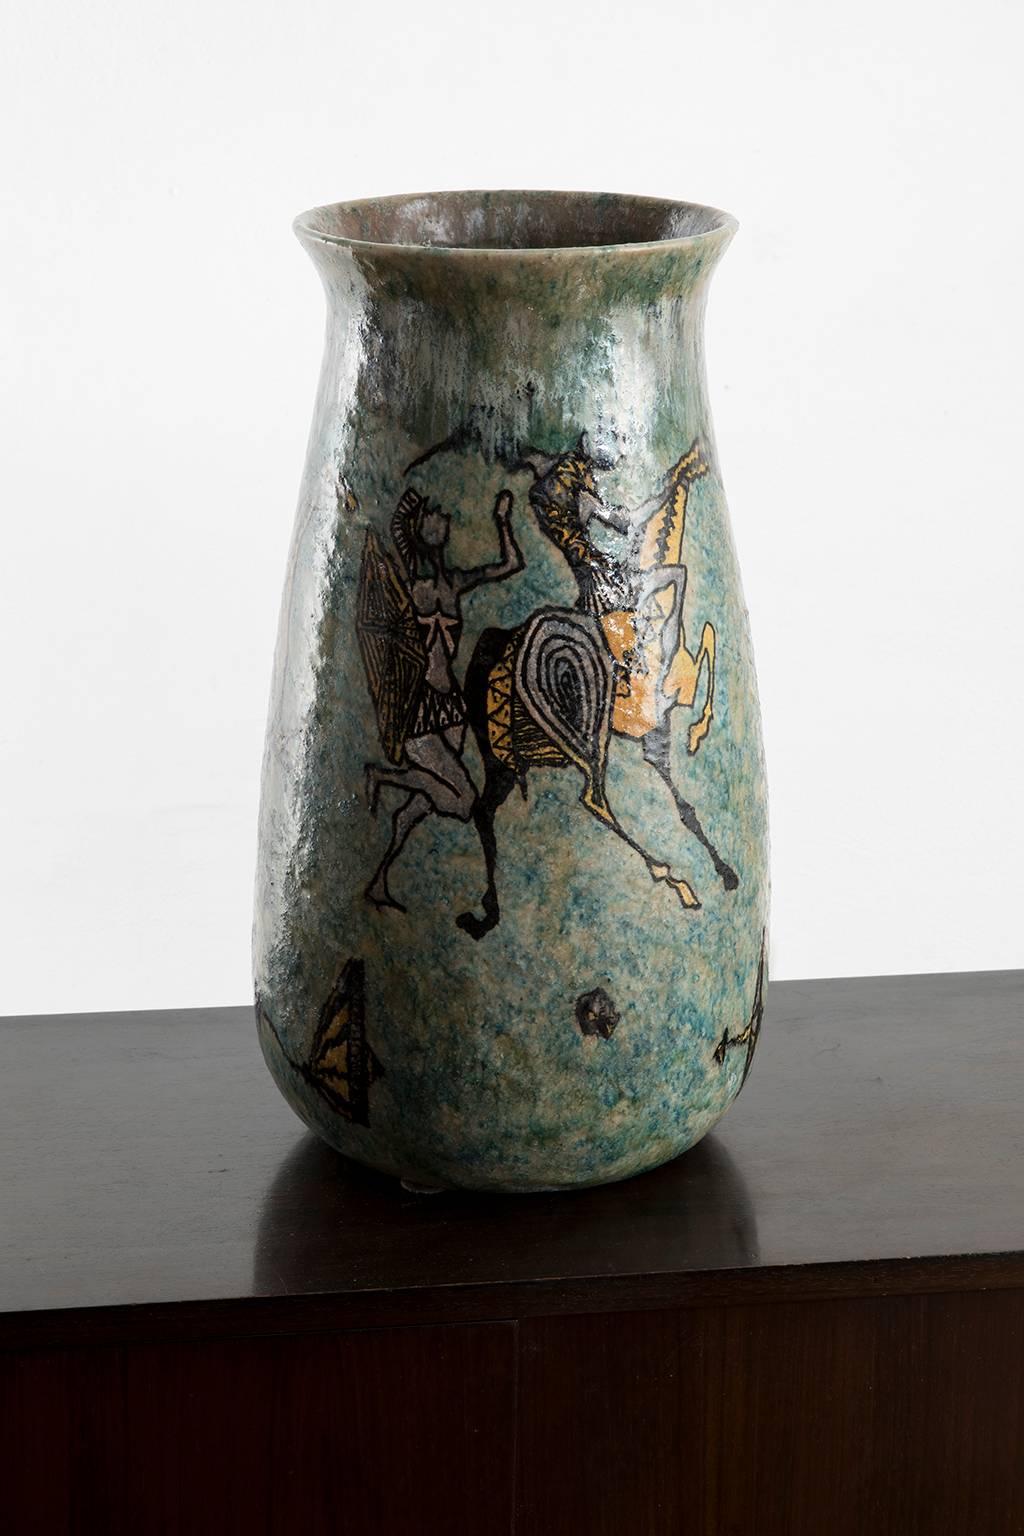 Monumental mythology themed vase created by the ceramist and sculptor Carlo Zauli in the early 1950s. Turquoise glaze in the background with magnificent Greek warriors fighting.
Signed 'Zauli Faenza' on the bottom.

Carlo Zauli (Faenza, 1926-2002)